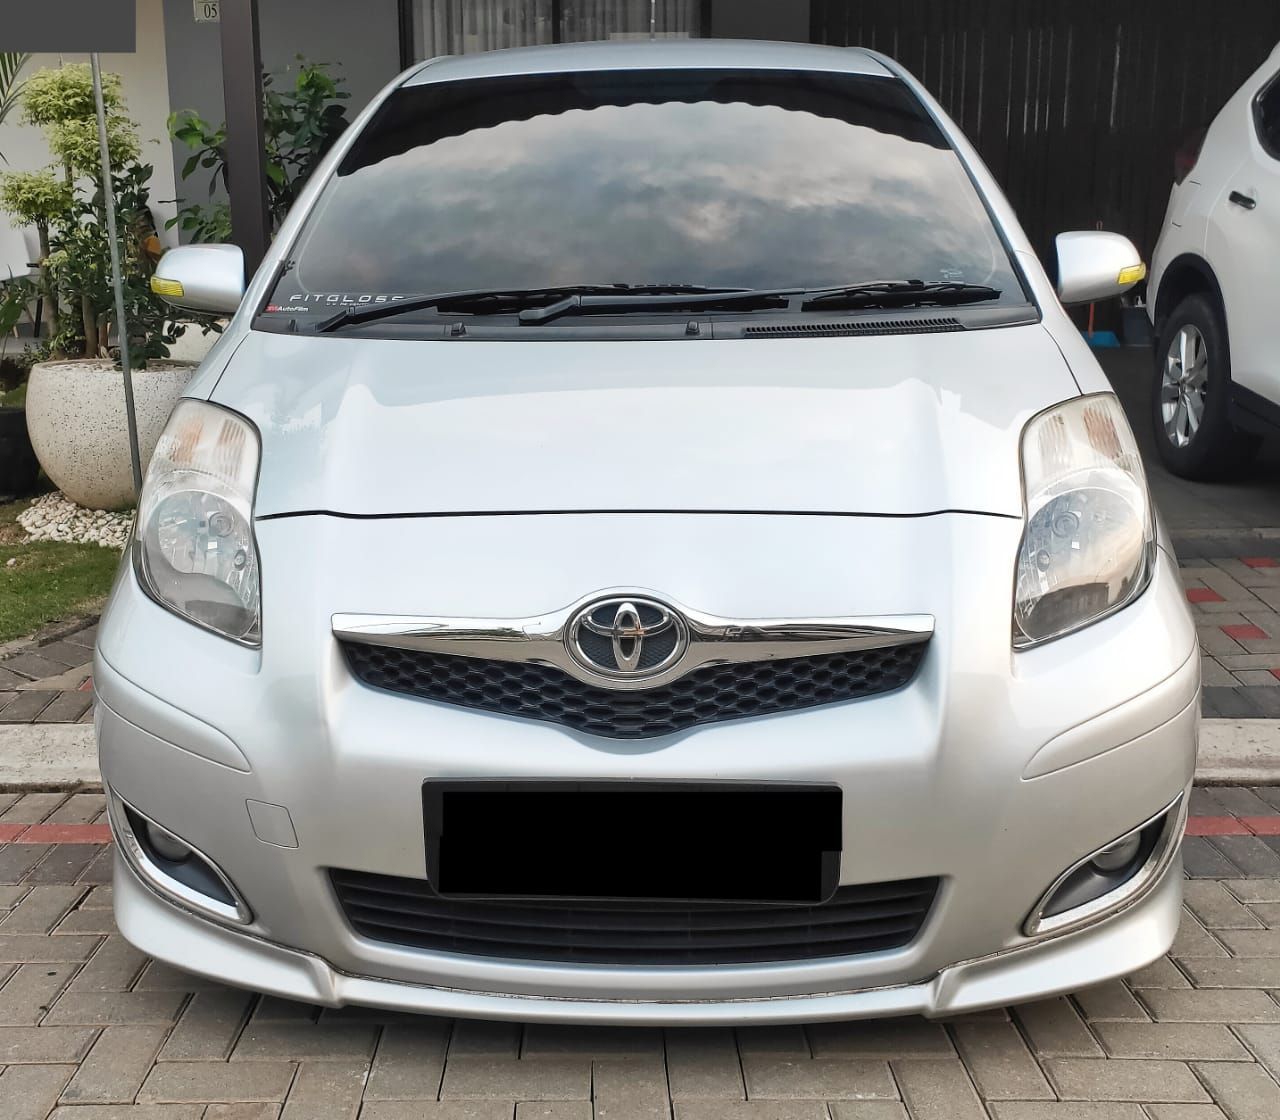 Used 2011 Toyota Yaris S TRD 1.5L MT S TRD 1.5L MT for sale